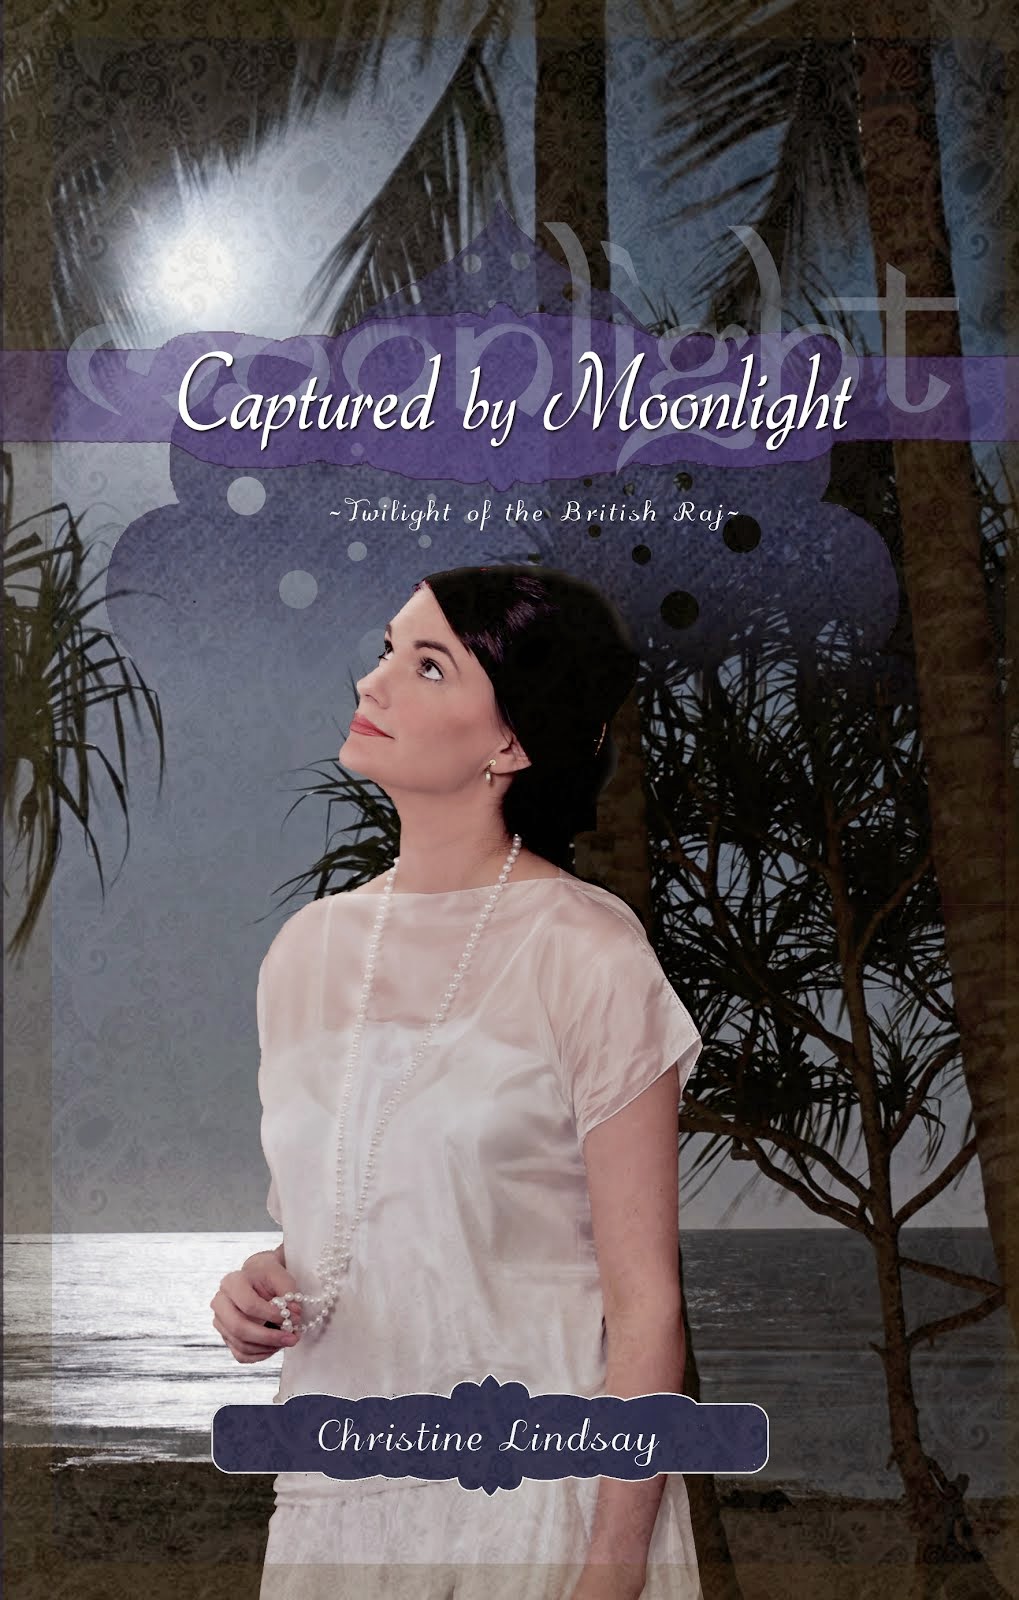 CAPTURED BY MOONLIGHT BOOK 2 OF SERIES TWILIGHT OF THE BRITISH RAJ